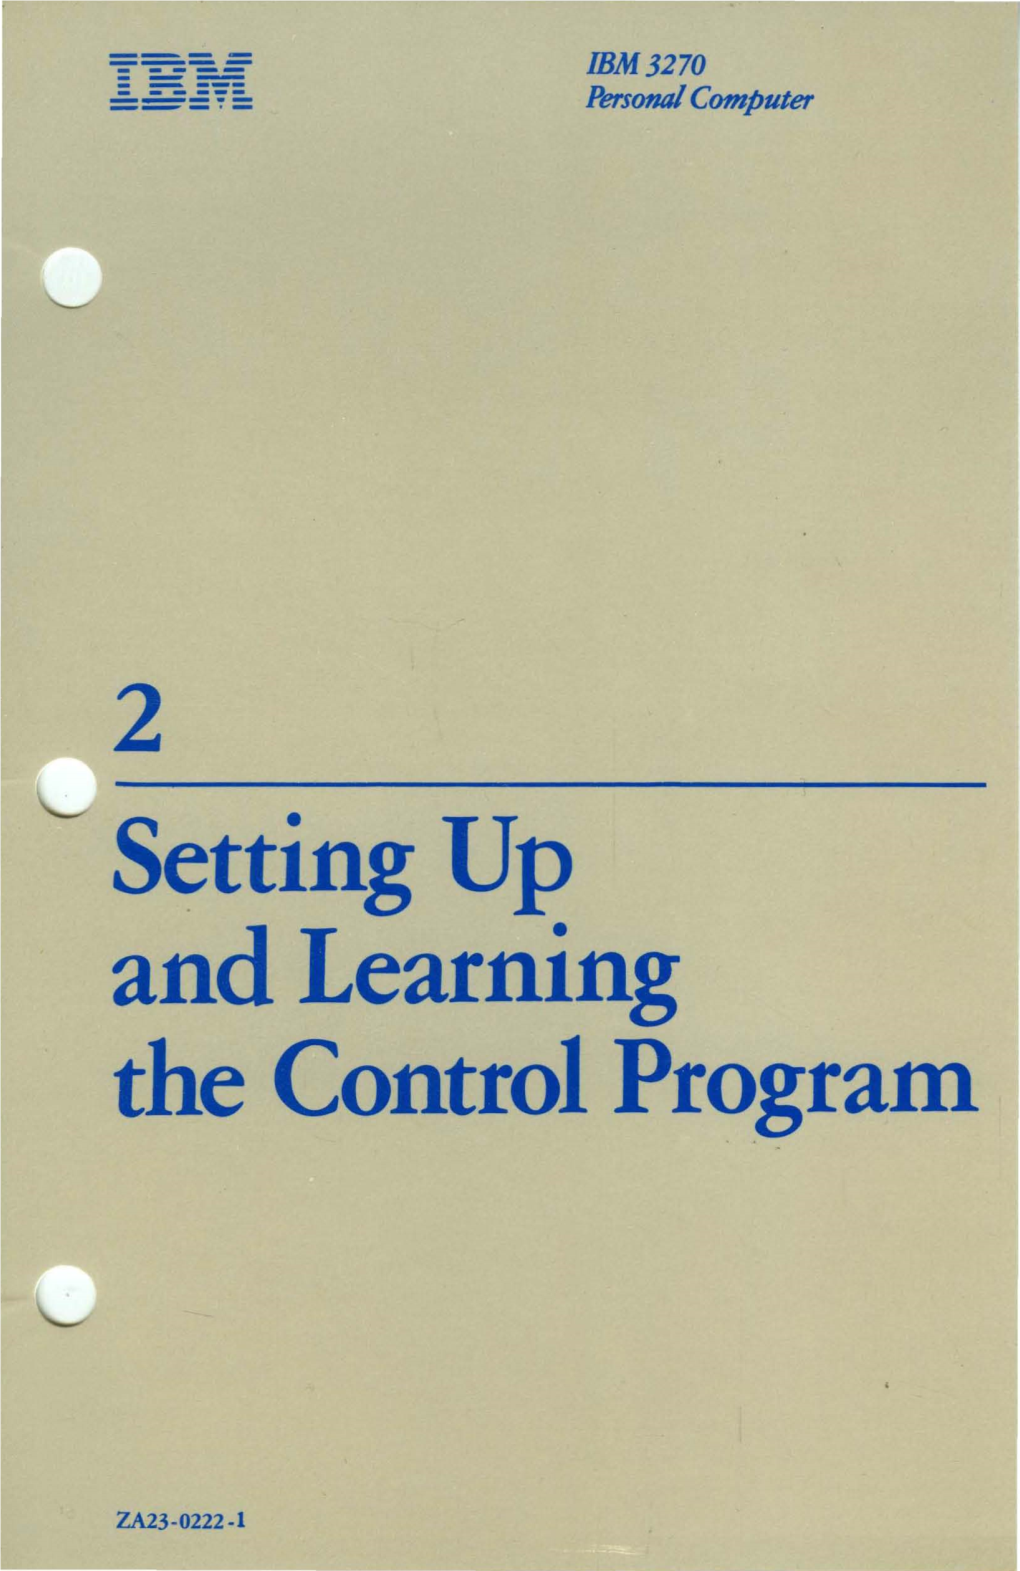 Setting up and Learning the Control Program